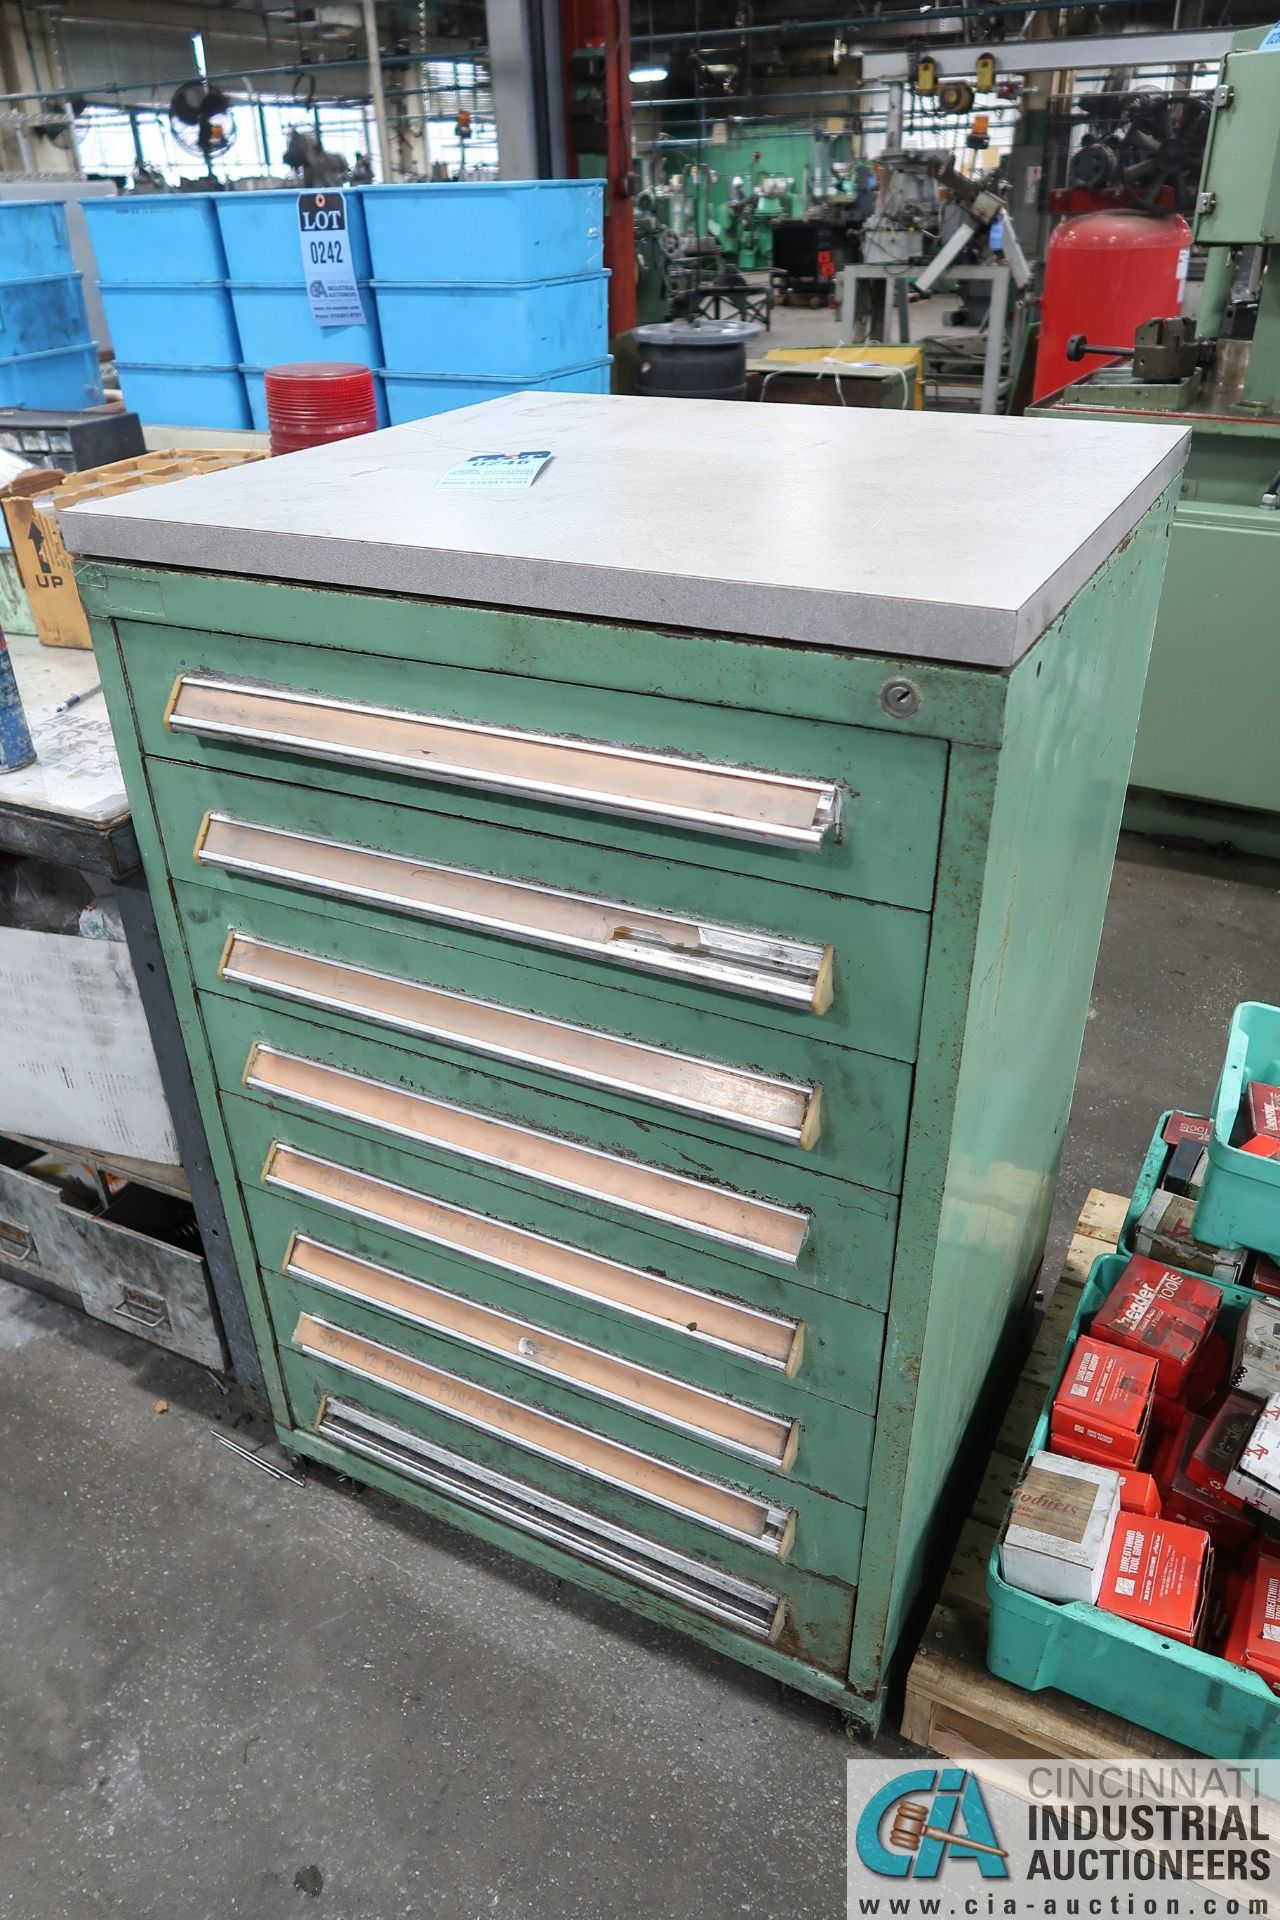 8-DRAWER LISTA-TYPE CABINET WITH MISC. HOT FORGE TOOLING - Loading fee due the "ERRA"